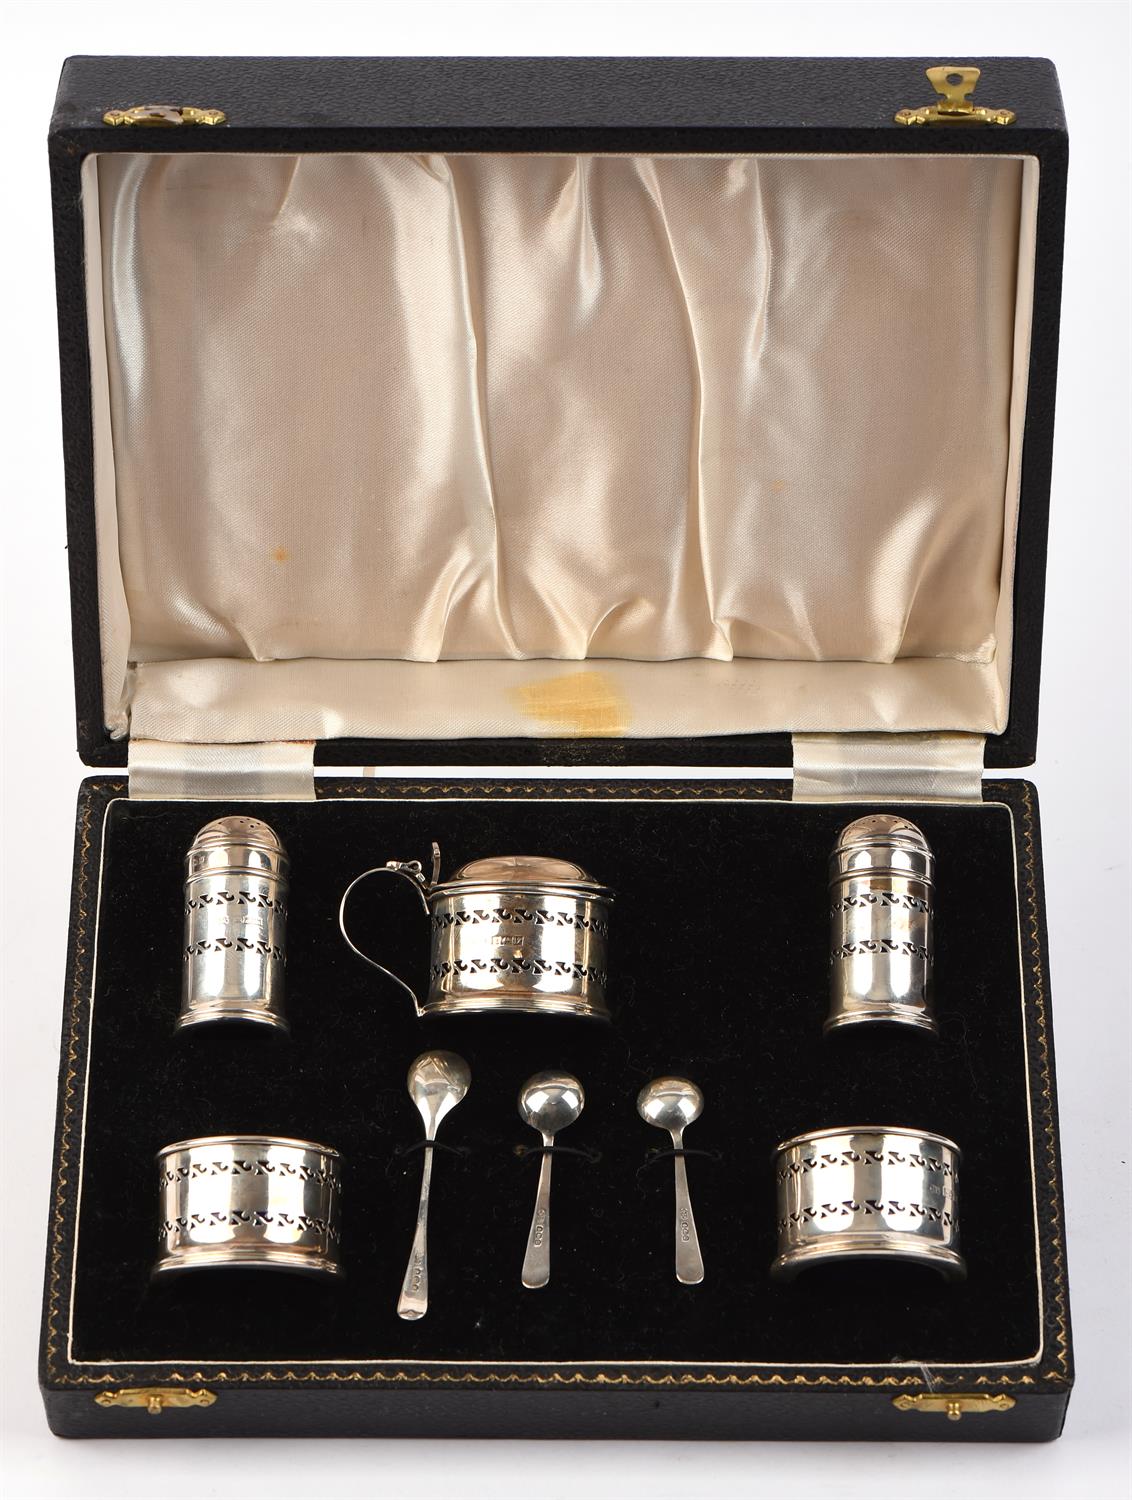 Cased 8 piece pierced silver cruet set with blue glass liners. - Image 2 of 2